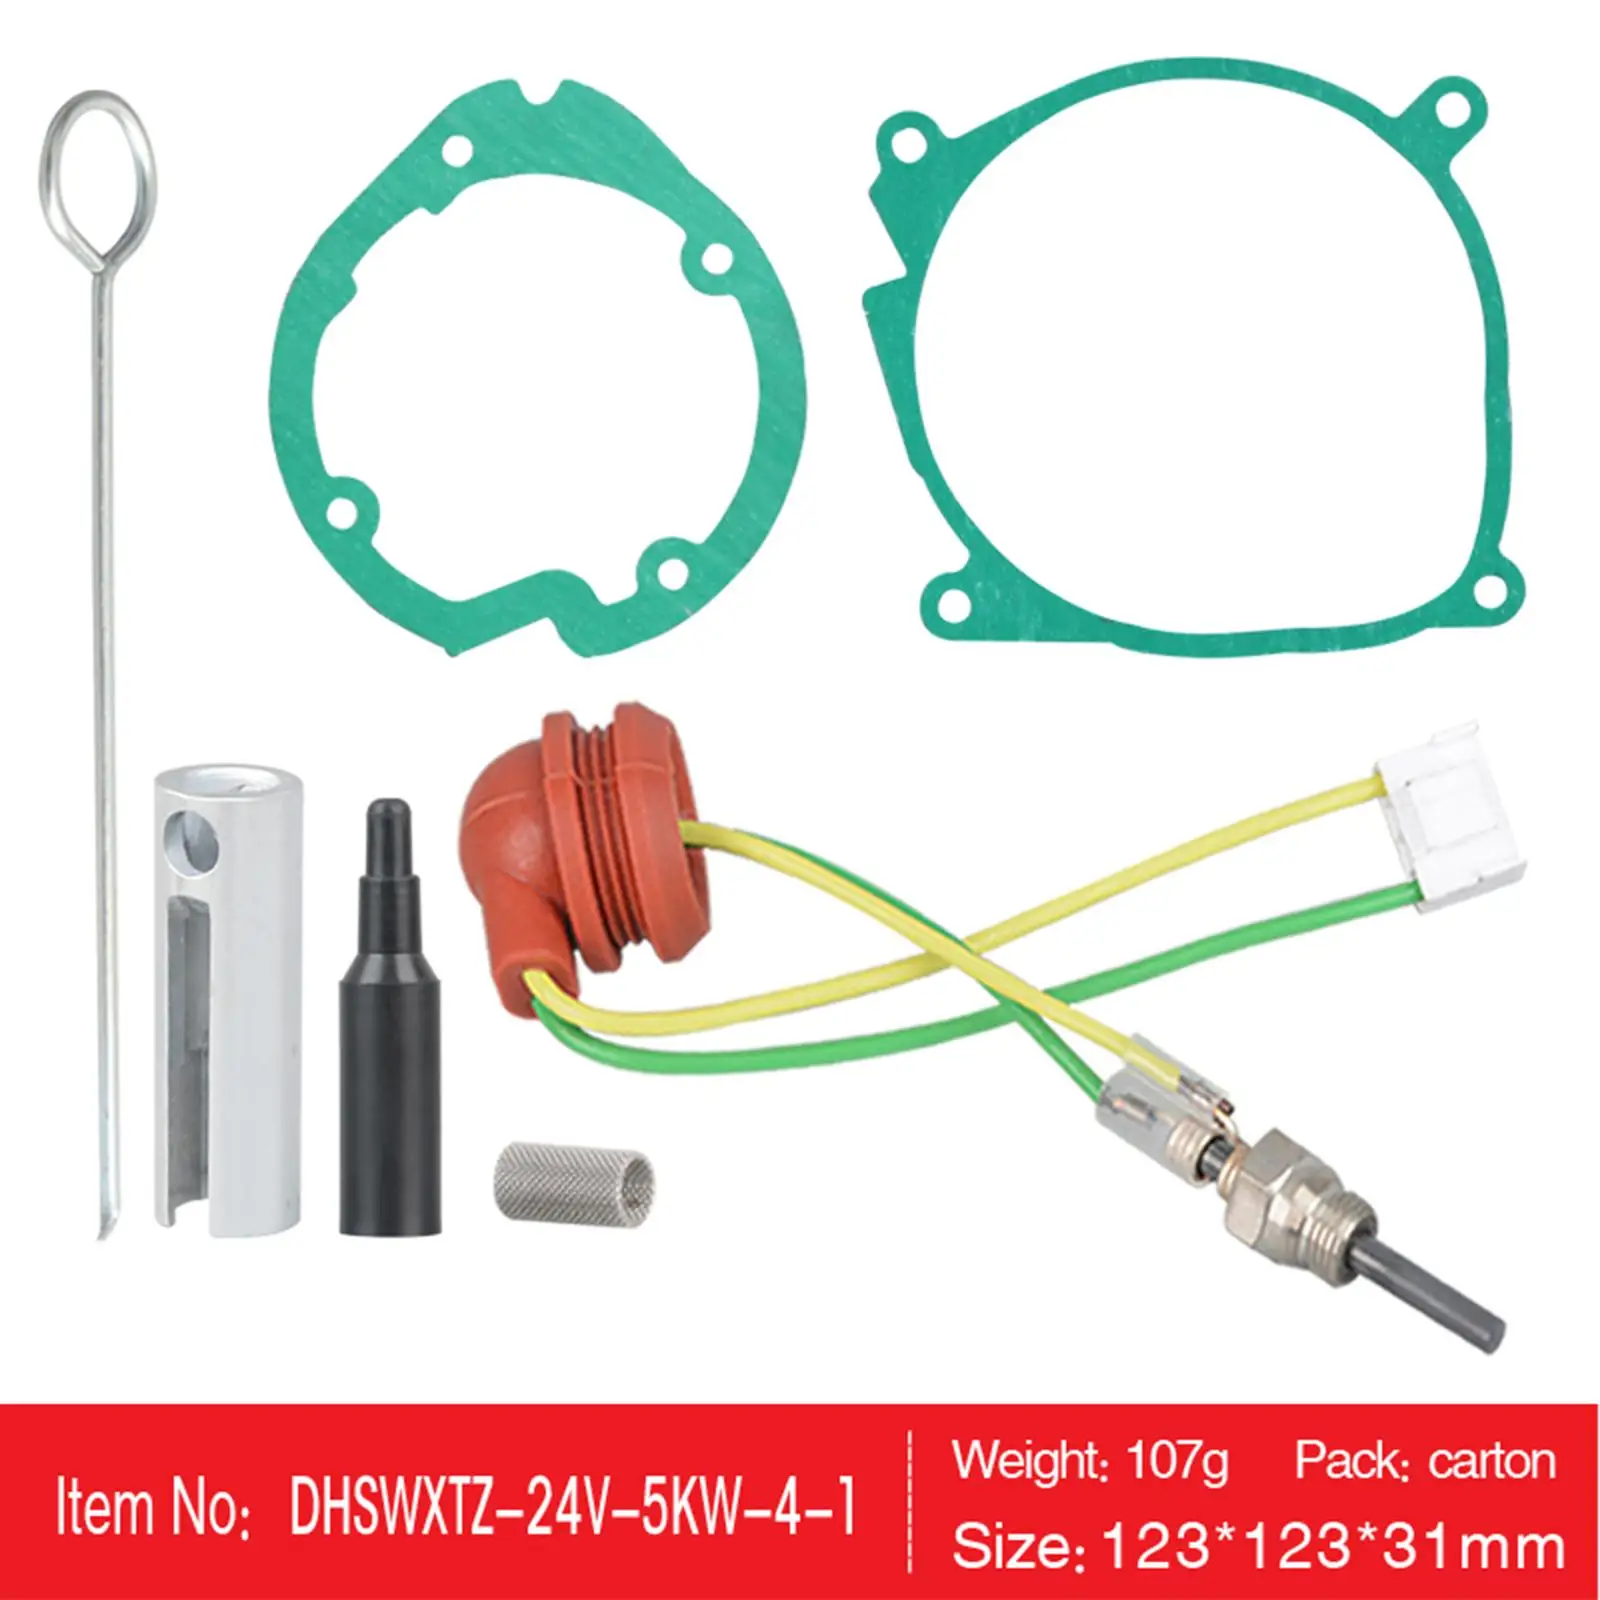 Glow Plug Repair Kit Wrench Direct Replaces for 24V 5kW Parking Heater